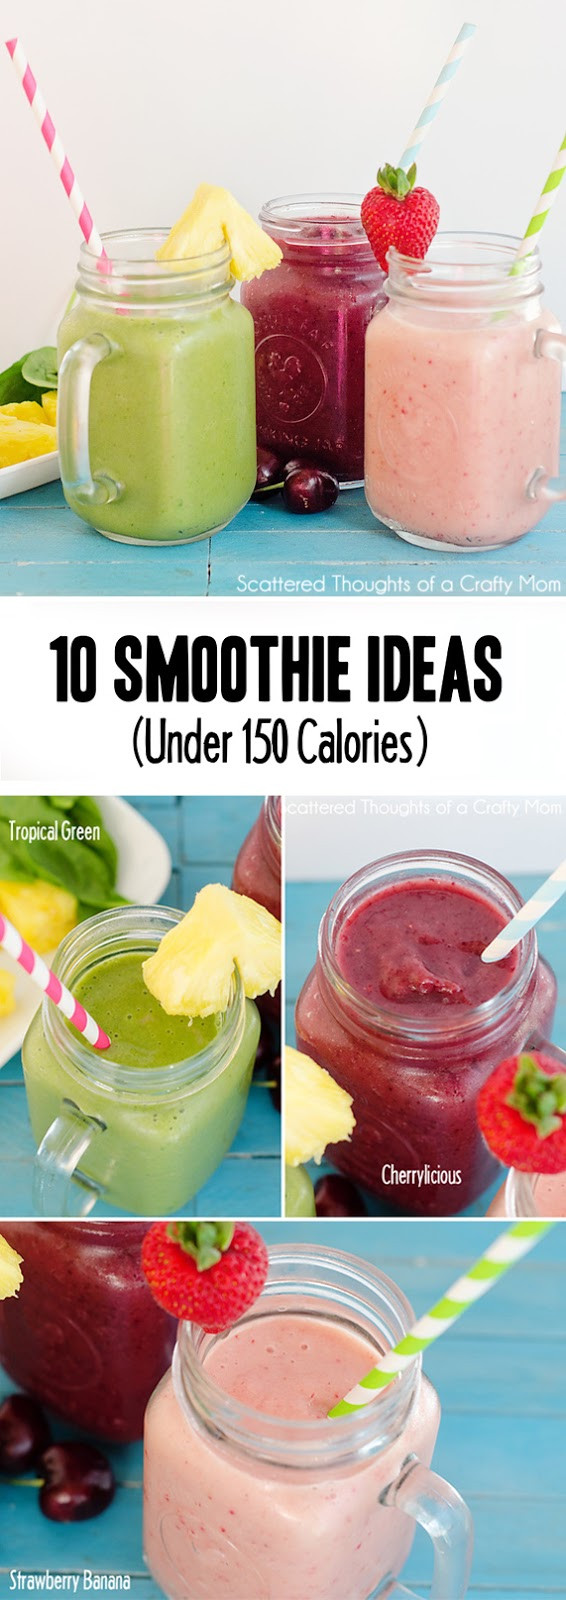 Low Calorie Smoothie Recipes
 10 Smoothie Ideas under 150 calories Scattered Thoughts